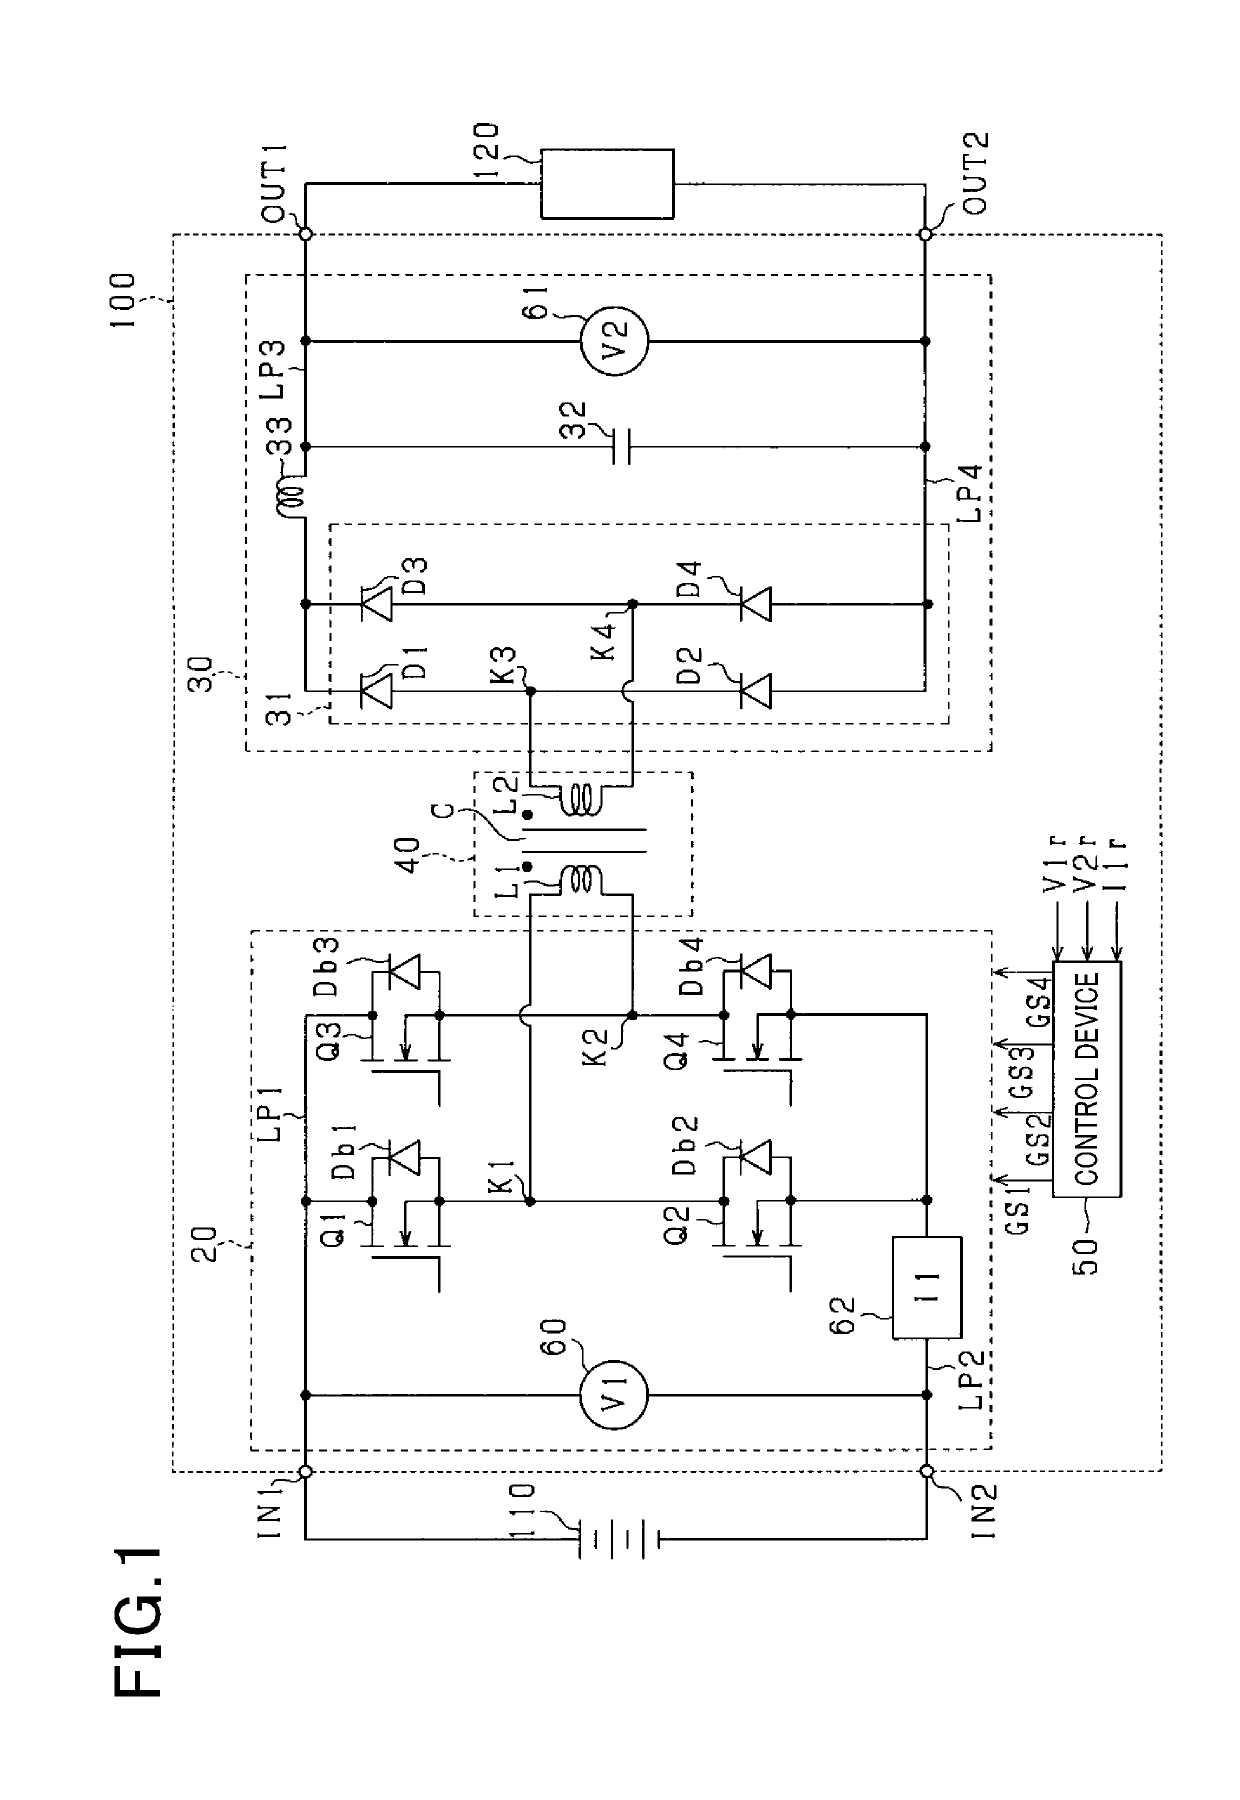 Control Device for DC-DC Converter